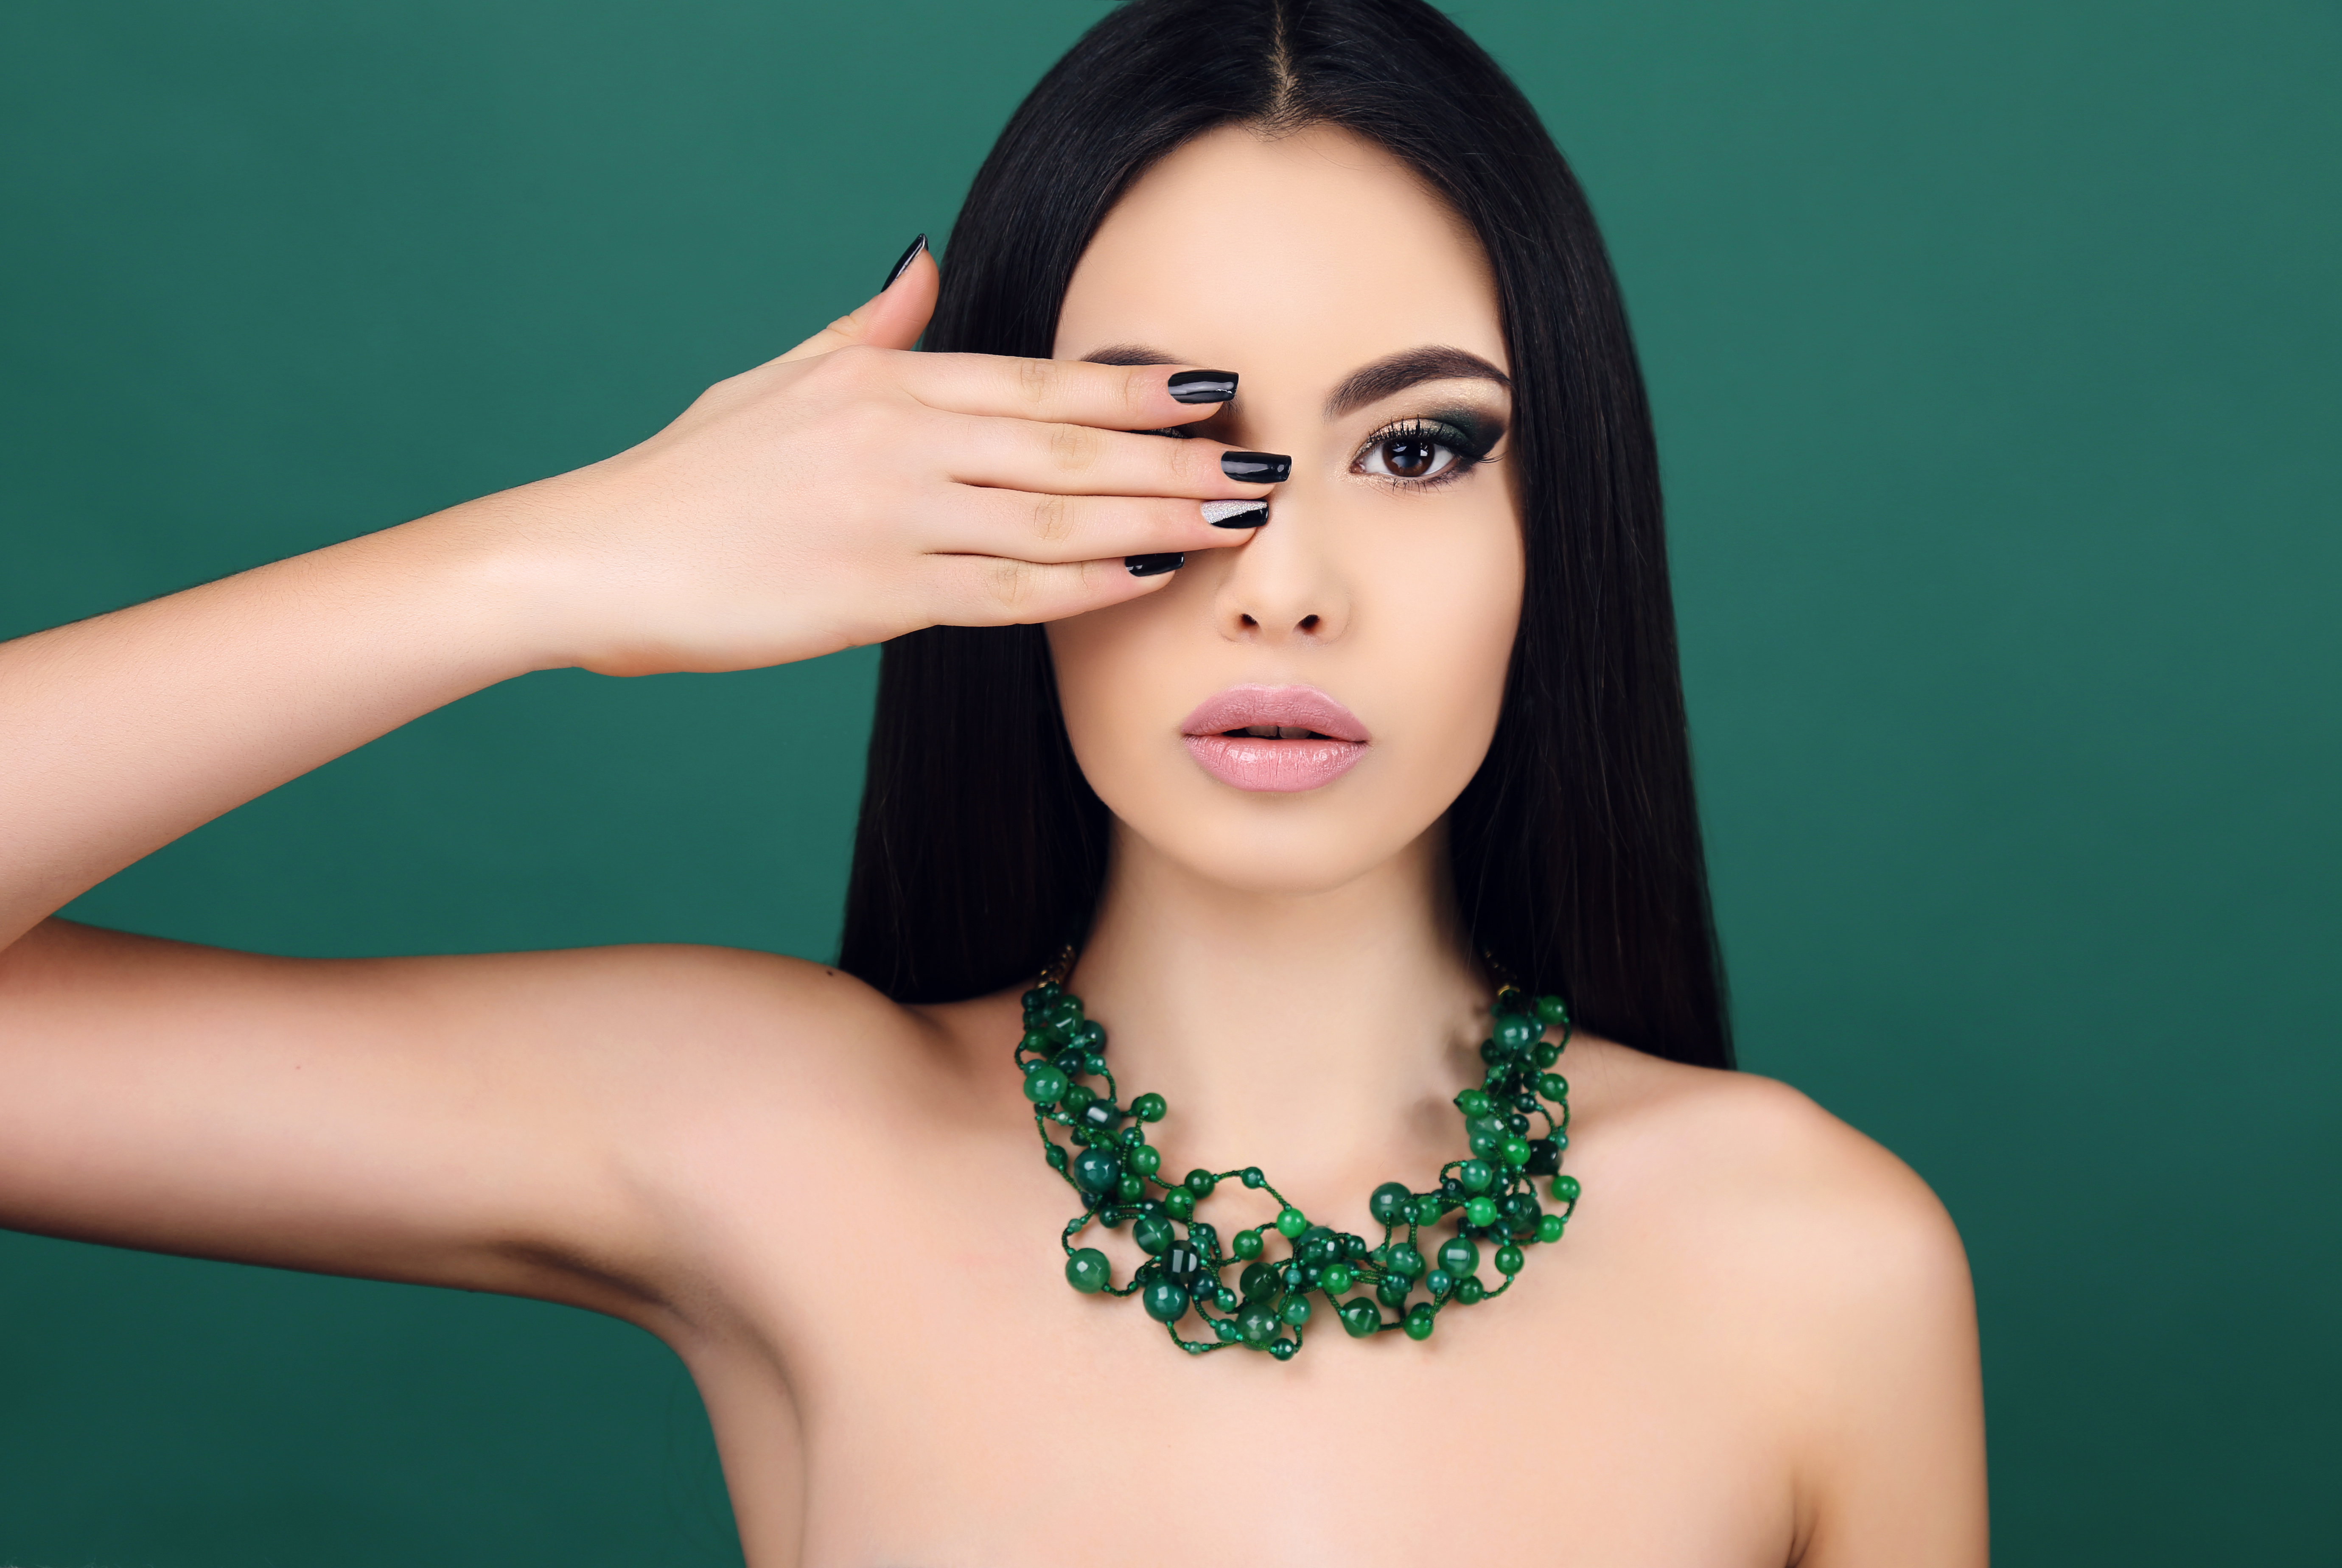 fashion portrait of beautiful sensual woman with dark straight hair with bright makeup and necklace